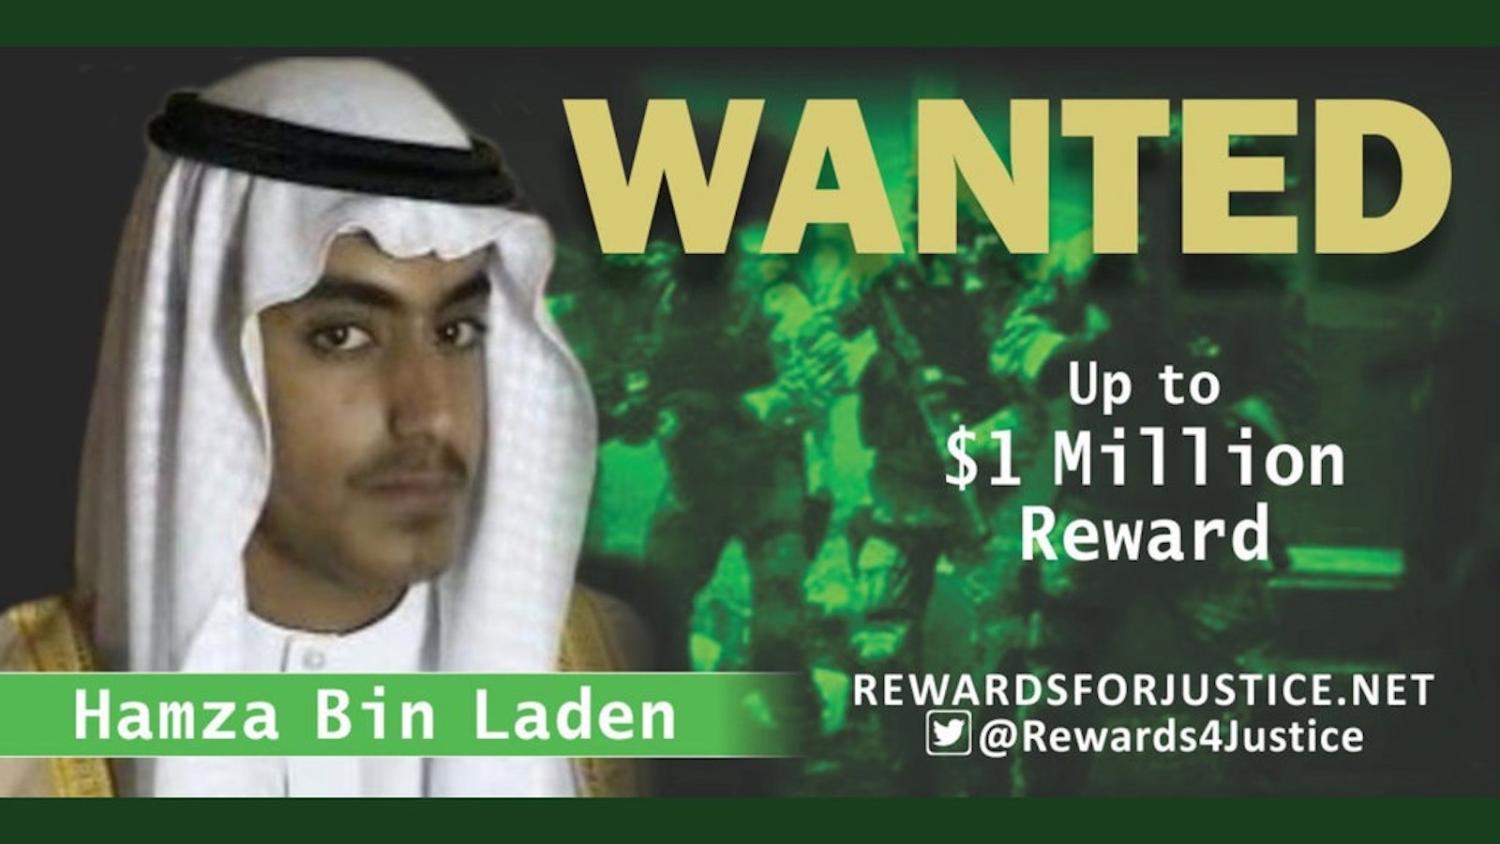 Wanted poster for Hamza bin Laden issued by the US State Department